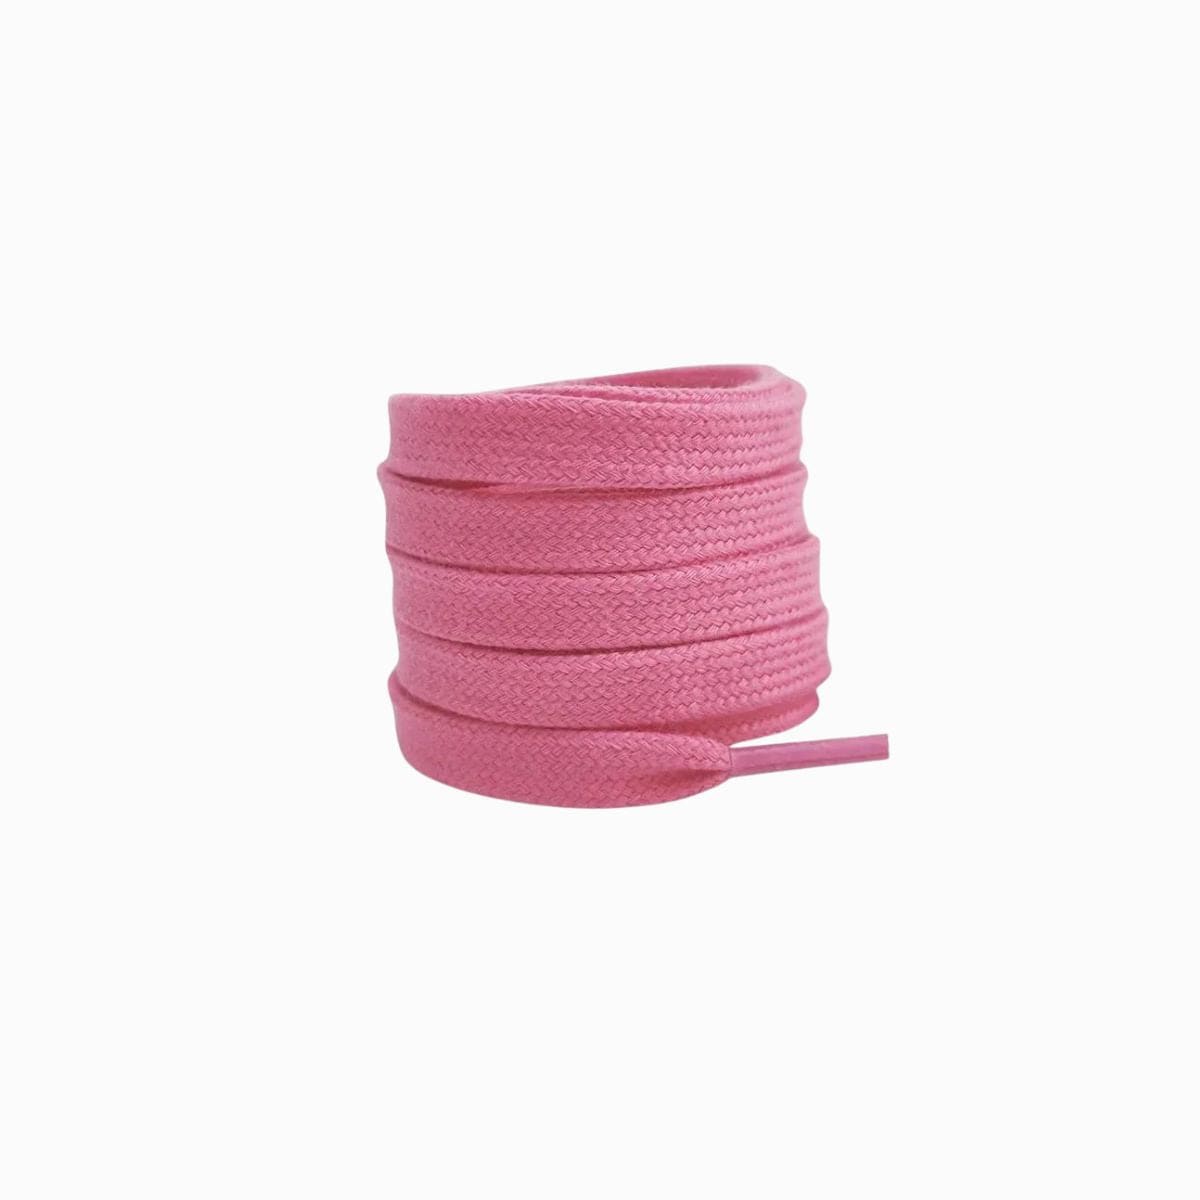 Blush Replacement Adidas Shoe Laces for Adidas Samba OG Sneakers by Kicks Shoelaces